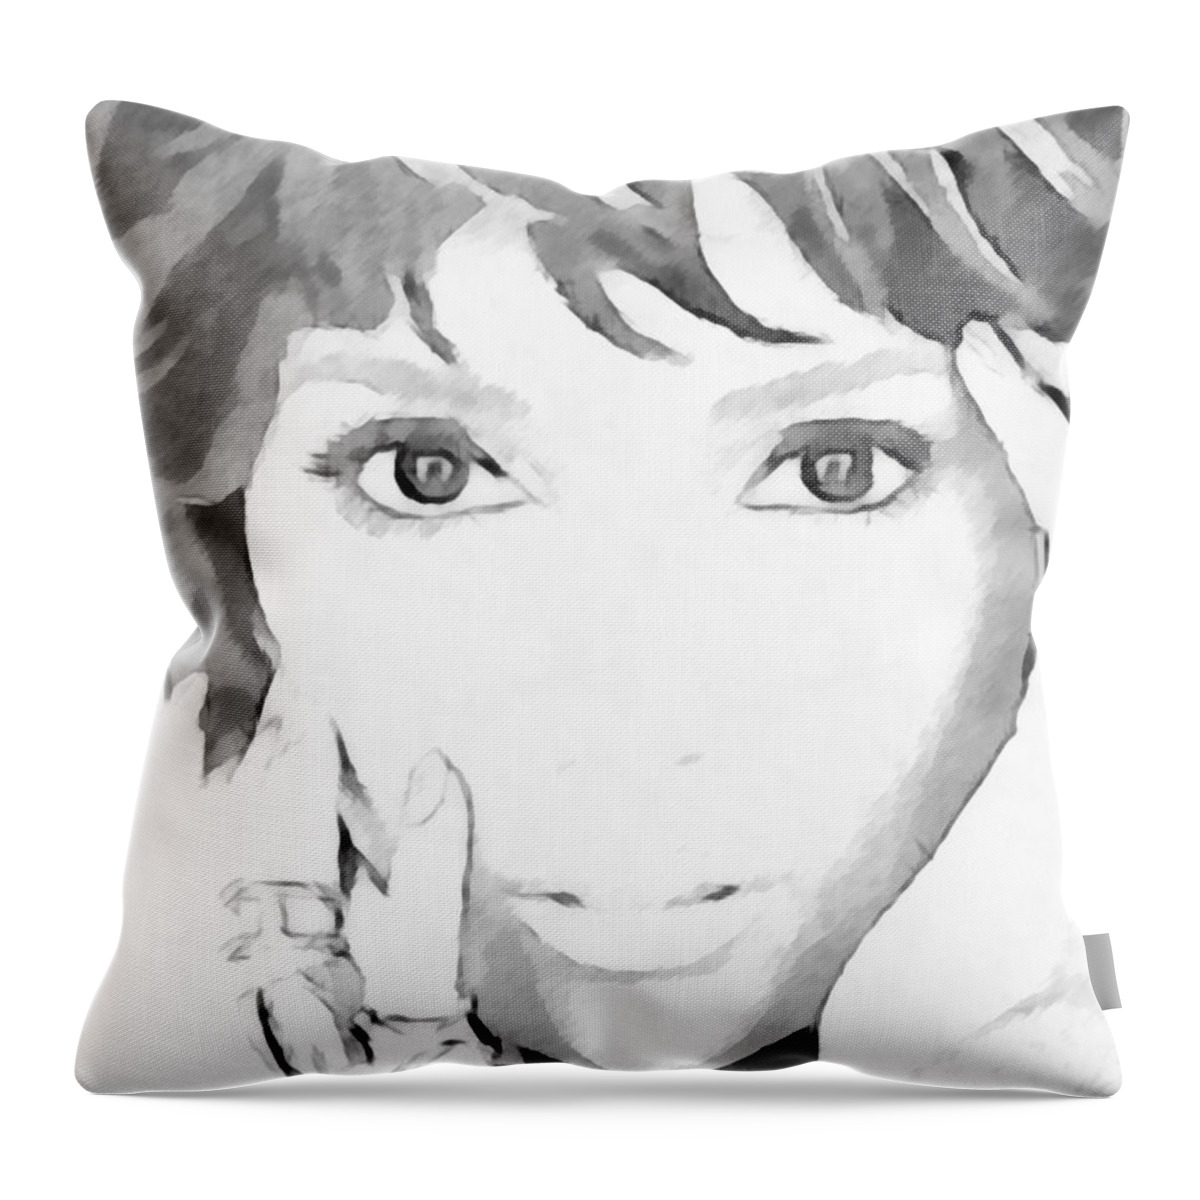 Celebrity Throw Pillow featuring the digital art Halle Berry by Humphrey Isselt